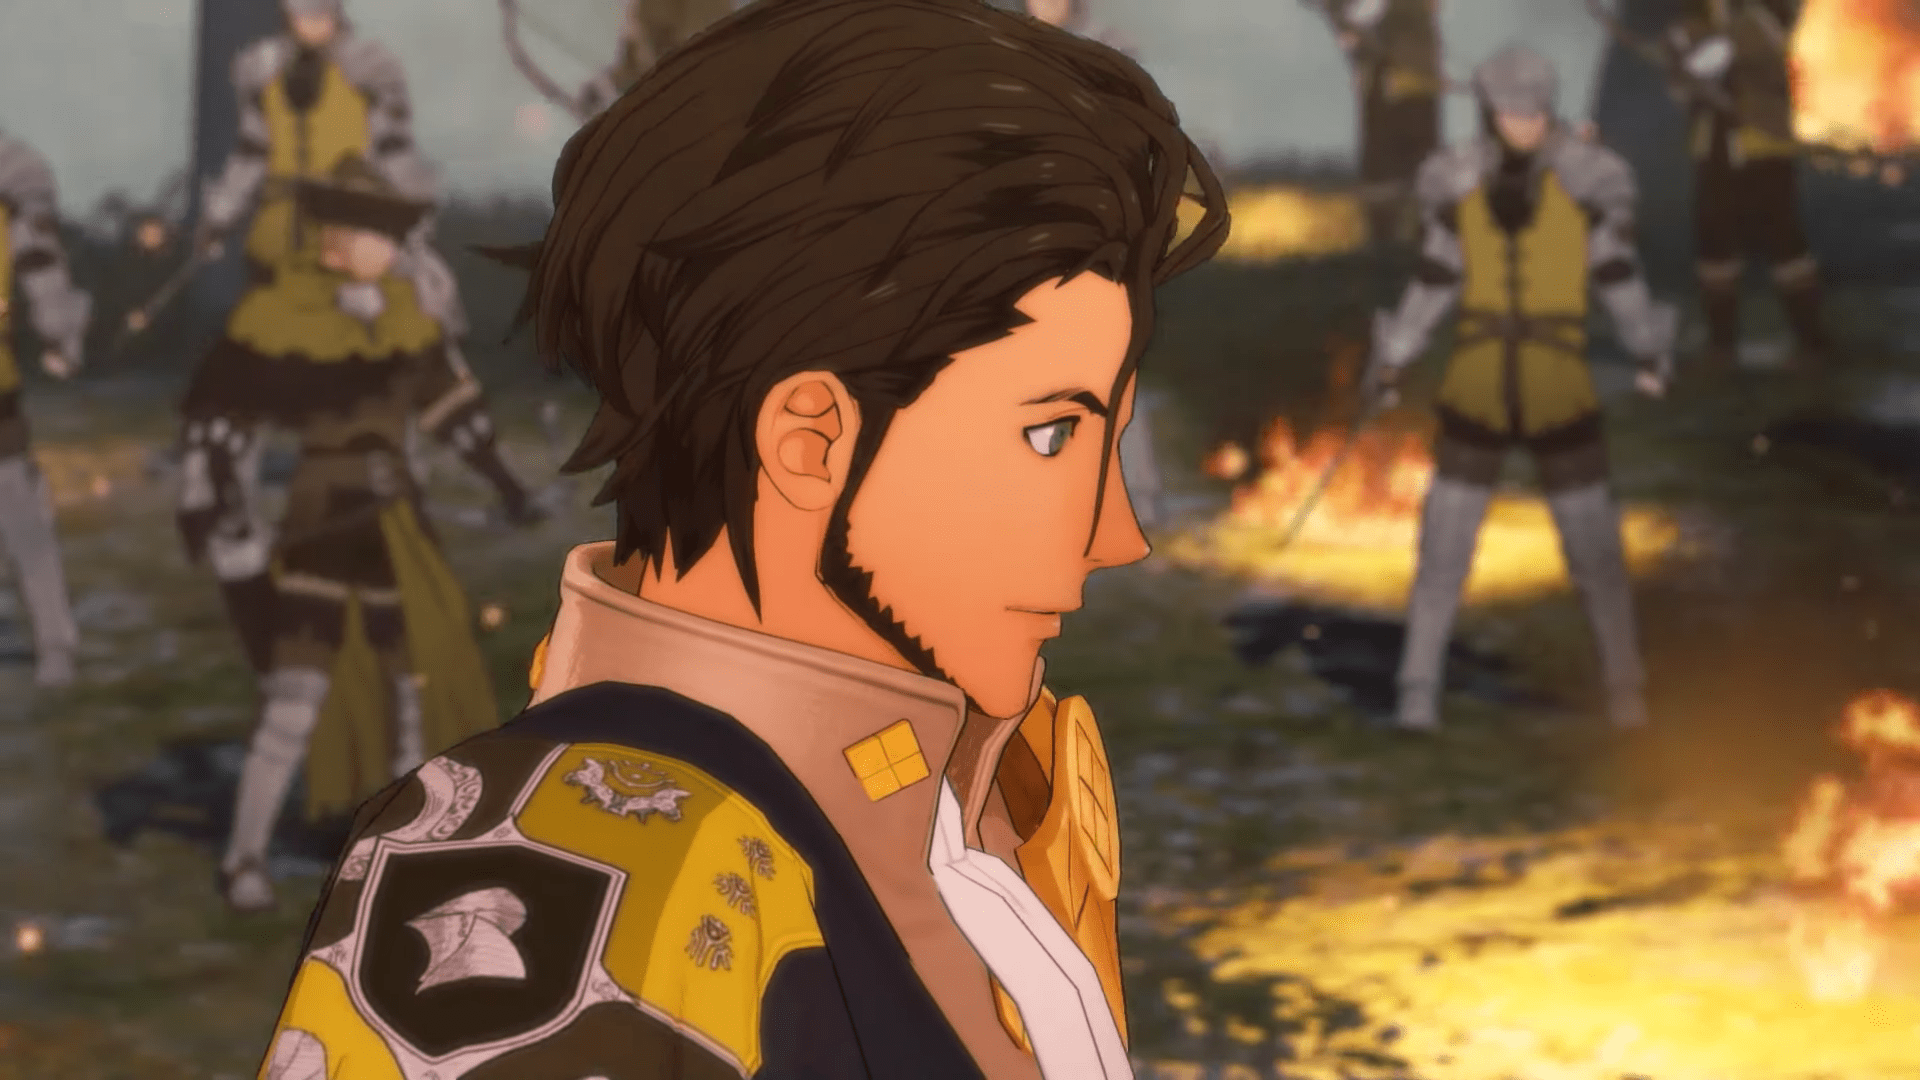 Fire Emblem: Three Houses’ Reviews Are Coming Out And The Game Looks Like It Will Impress